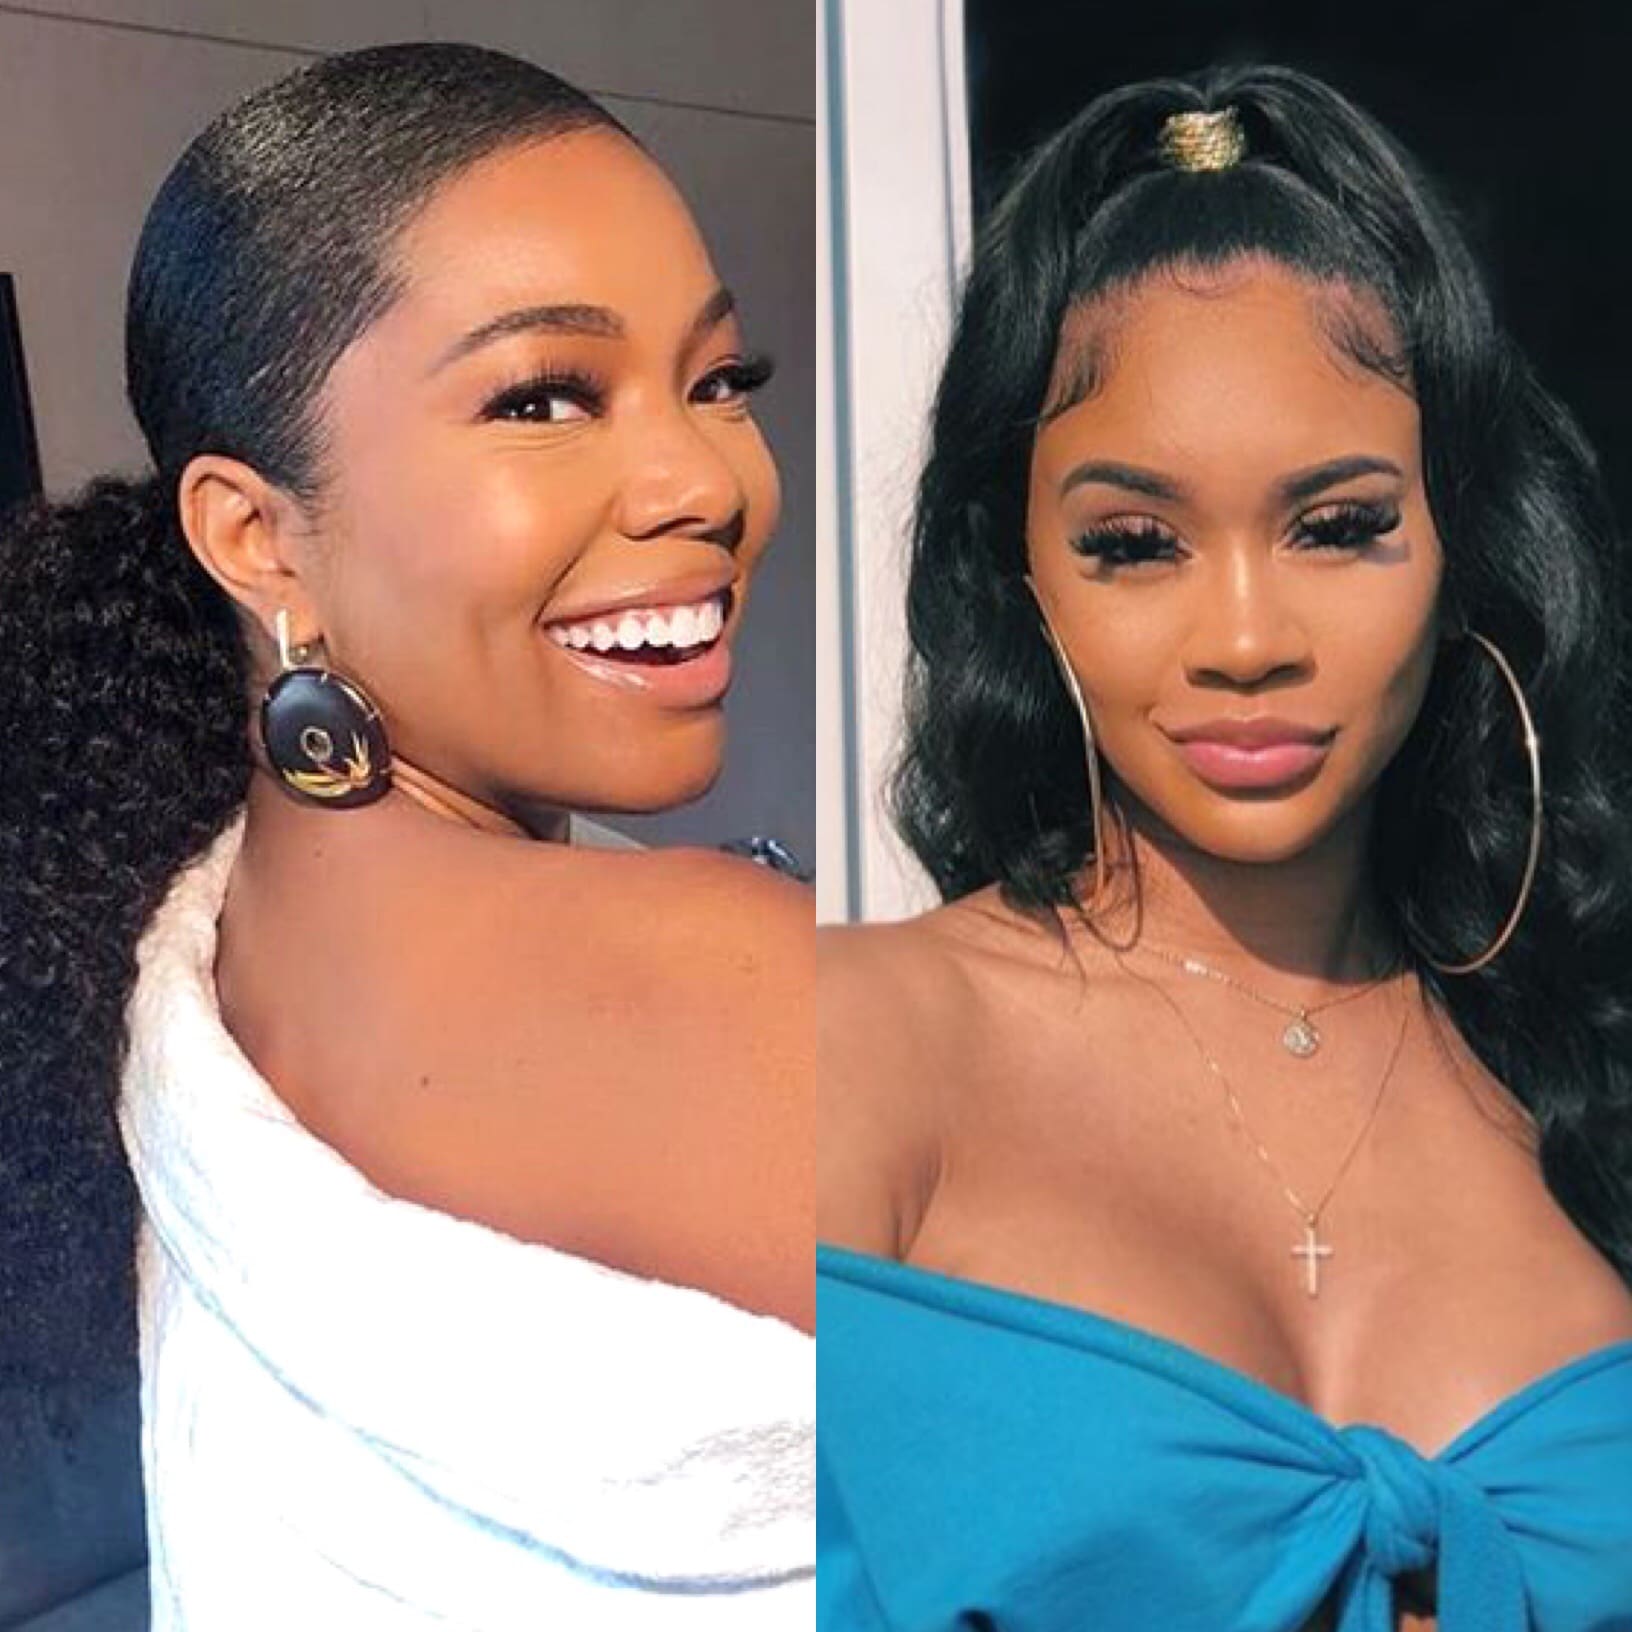 Gabrielle Union And Her Cousin Saweetie Wear Matching Outfits